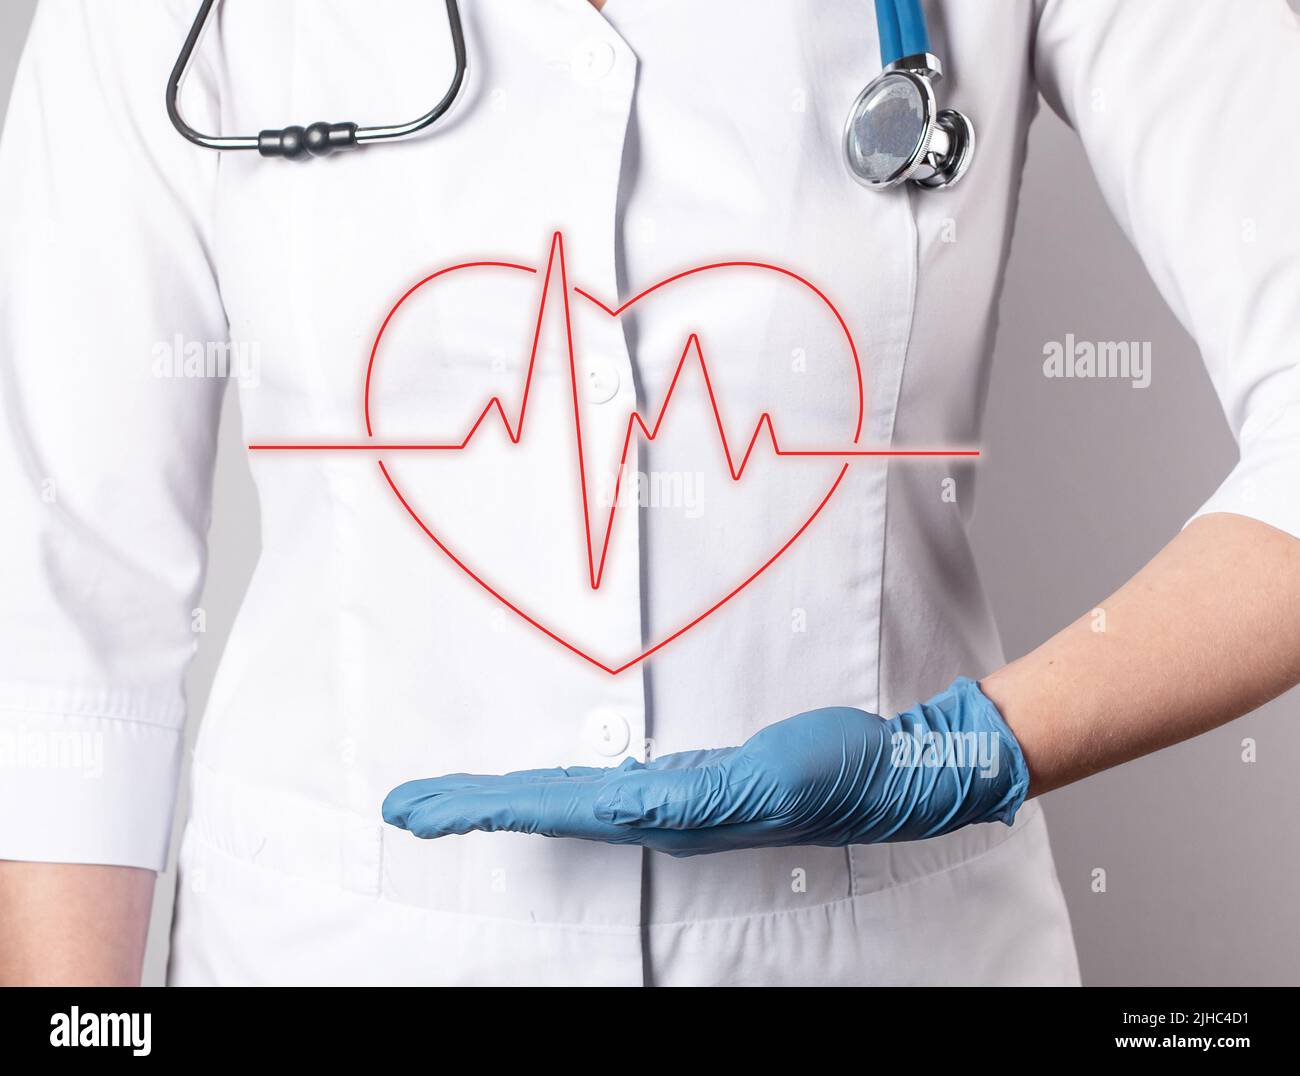 ECG. Heart with heartbeat rhythm over doctor hand. Electrocardiogram test conducting, cardiac diseases detection concept. Woman in lab coat with stethoscope. High quality photo Stock Photo